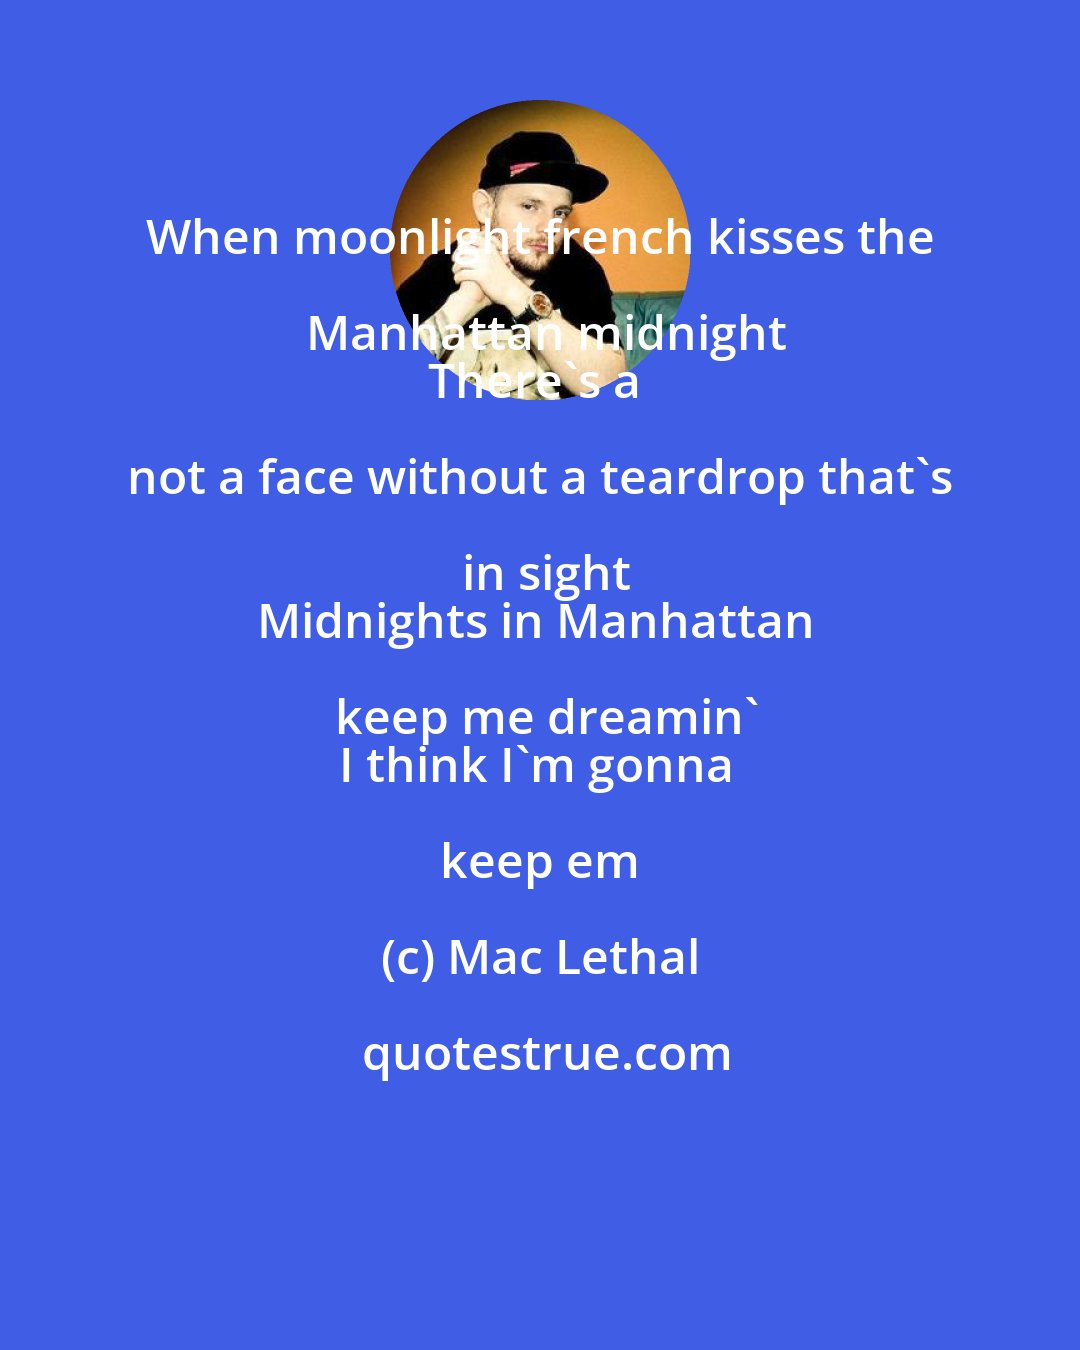 Mac Lethal: When moonlight french kisses the Manhattan midnight
There's a not a face without a teardrop that's in sight
Midnights in Manhattan keep me dreamin'
I think I'm gonna keep em